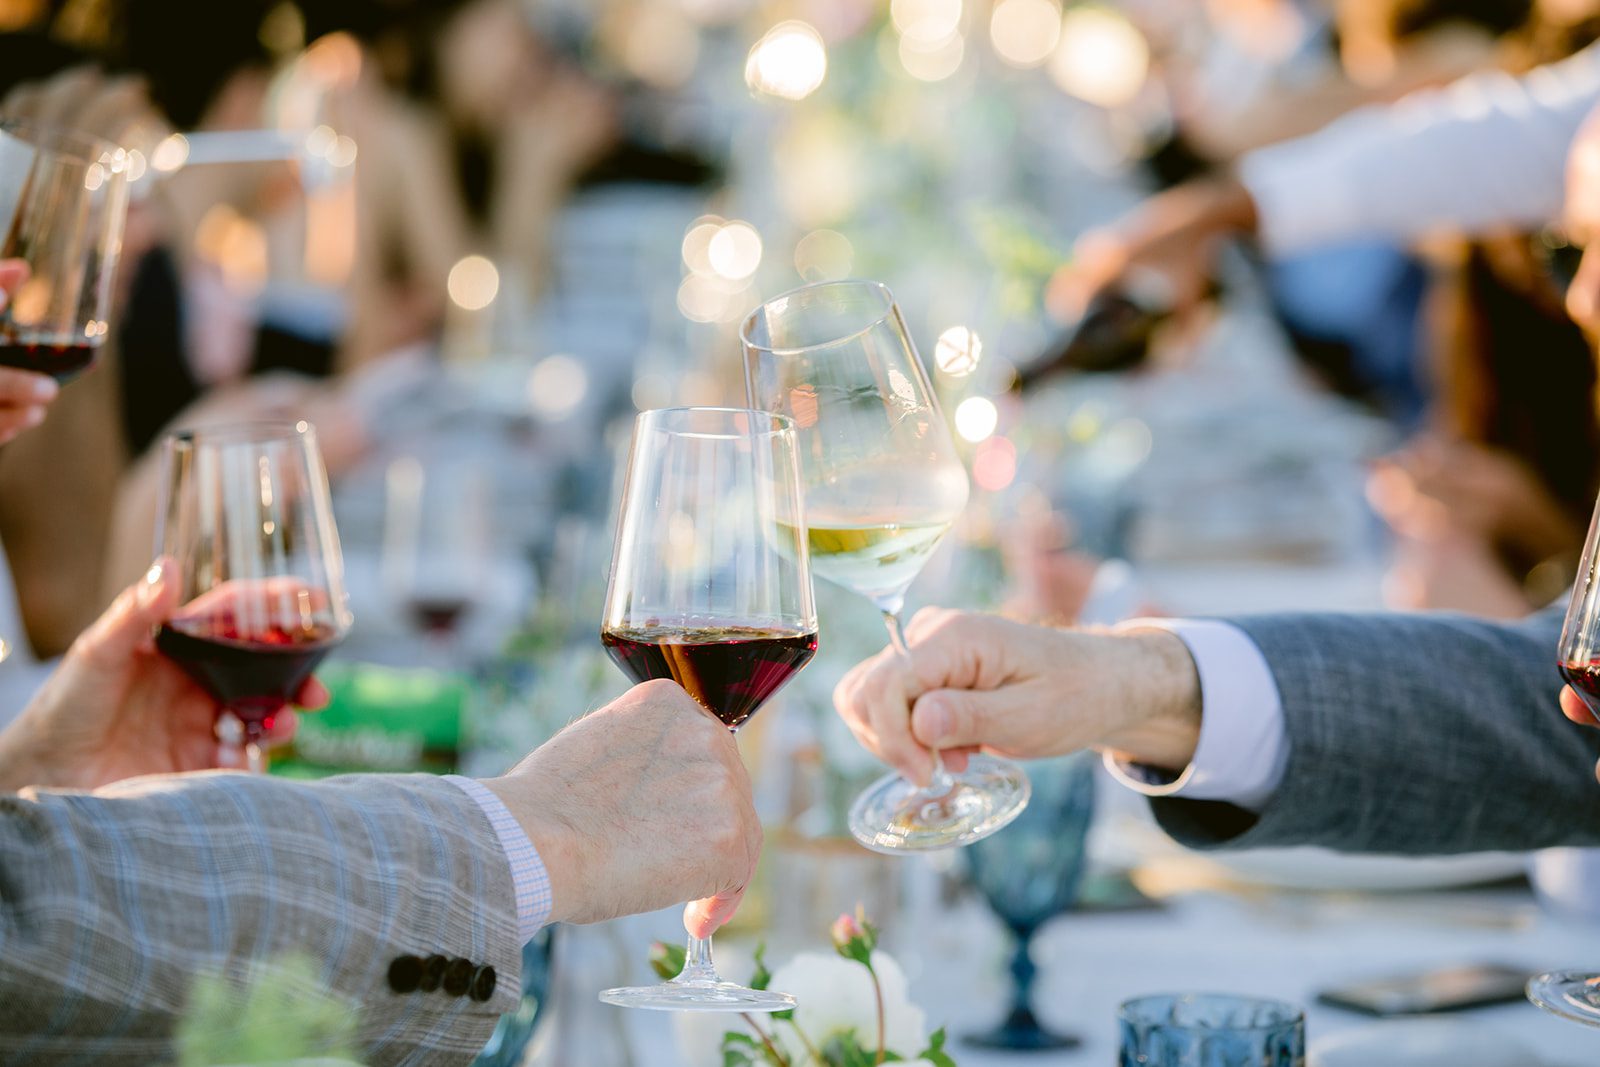 A group of people toasting wine glasses at an event.